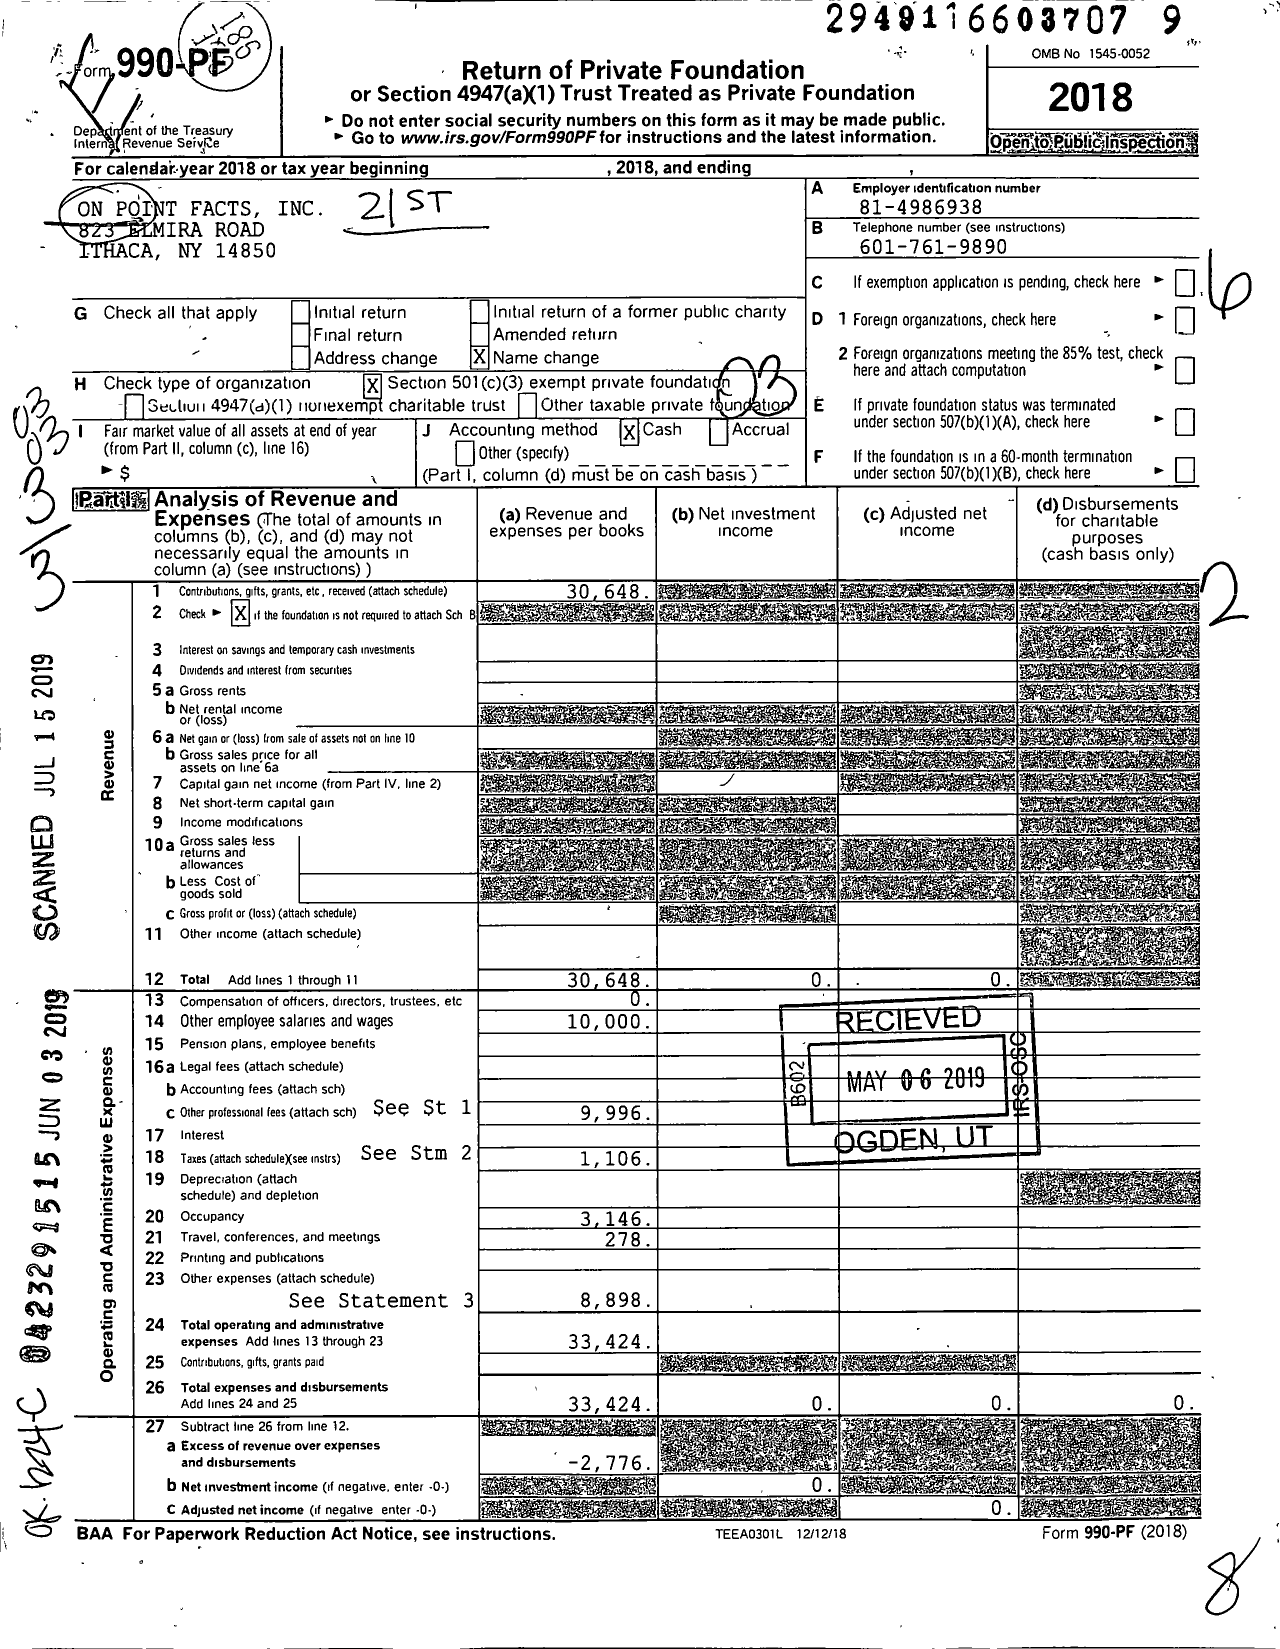 Image of first page of 2018 Form 990PF for On Point Facts